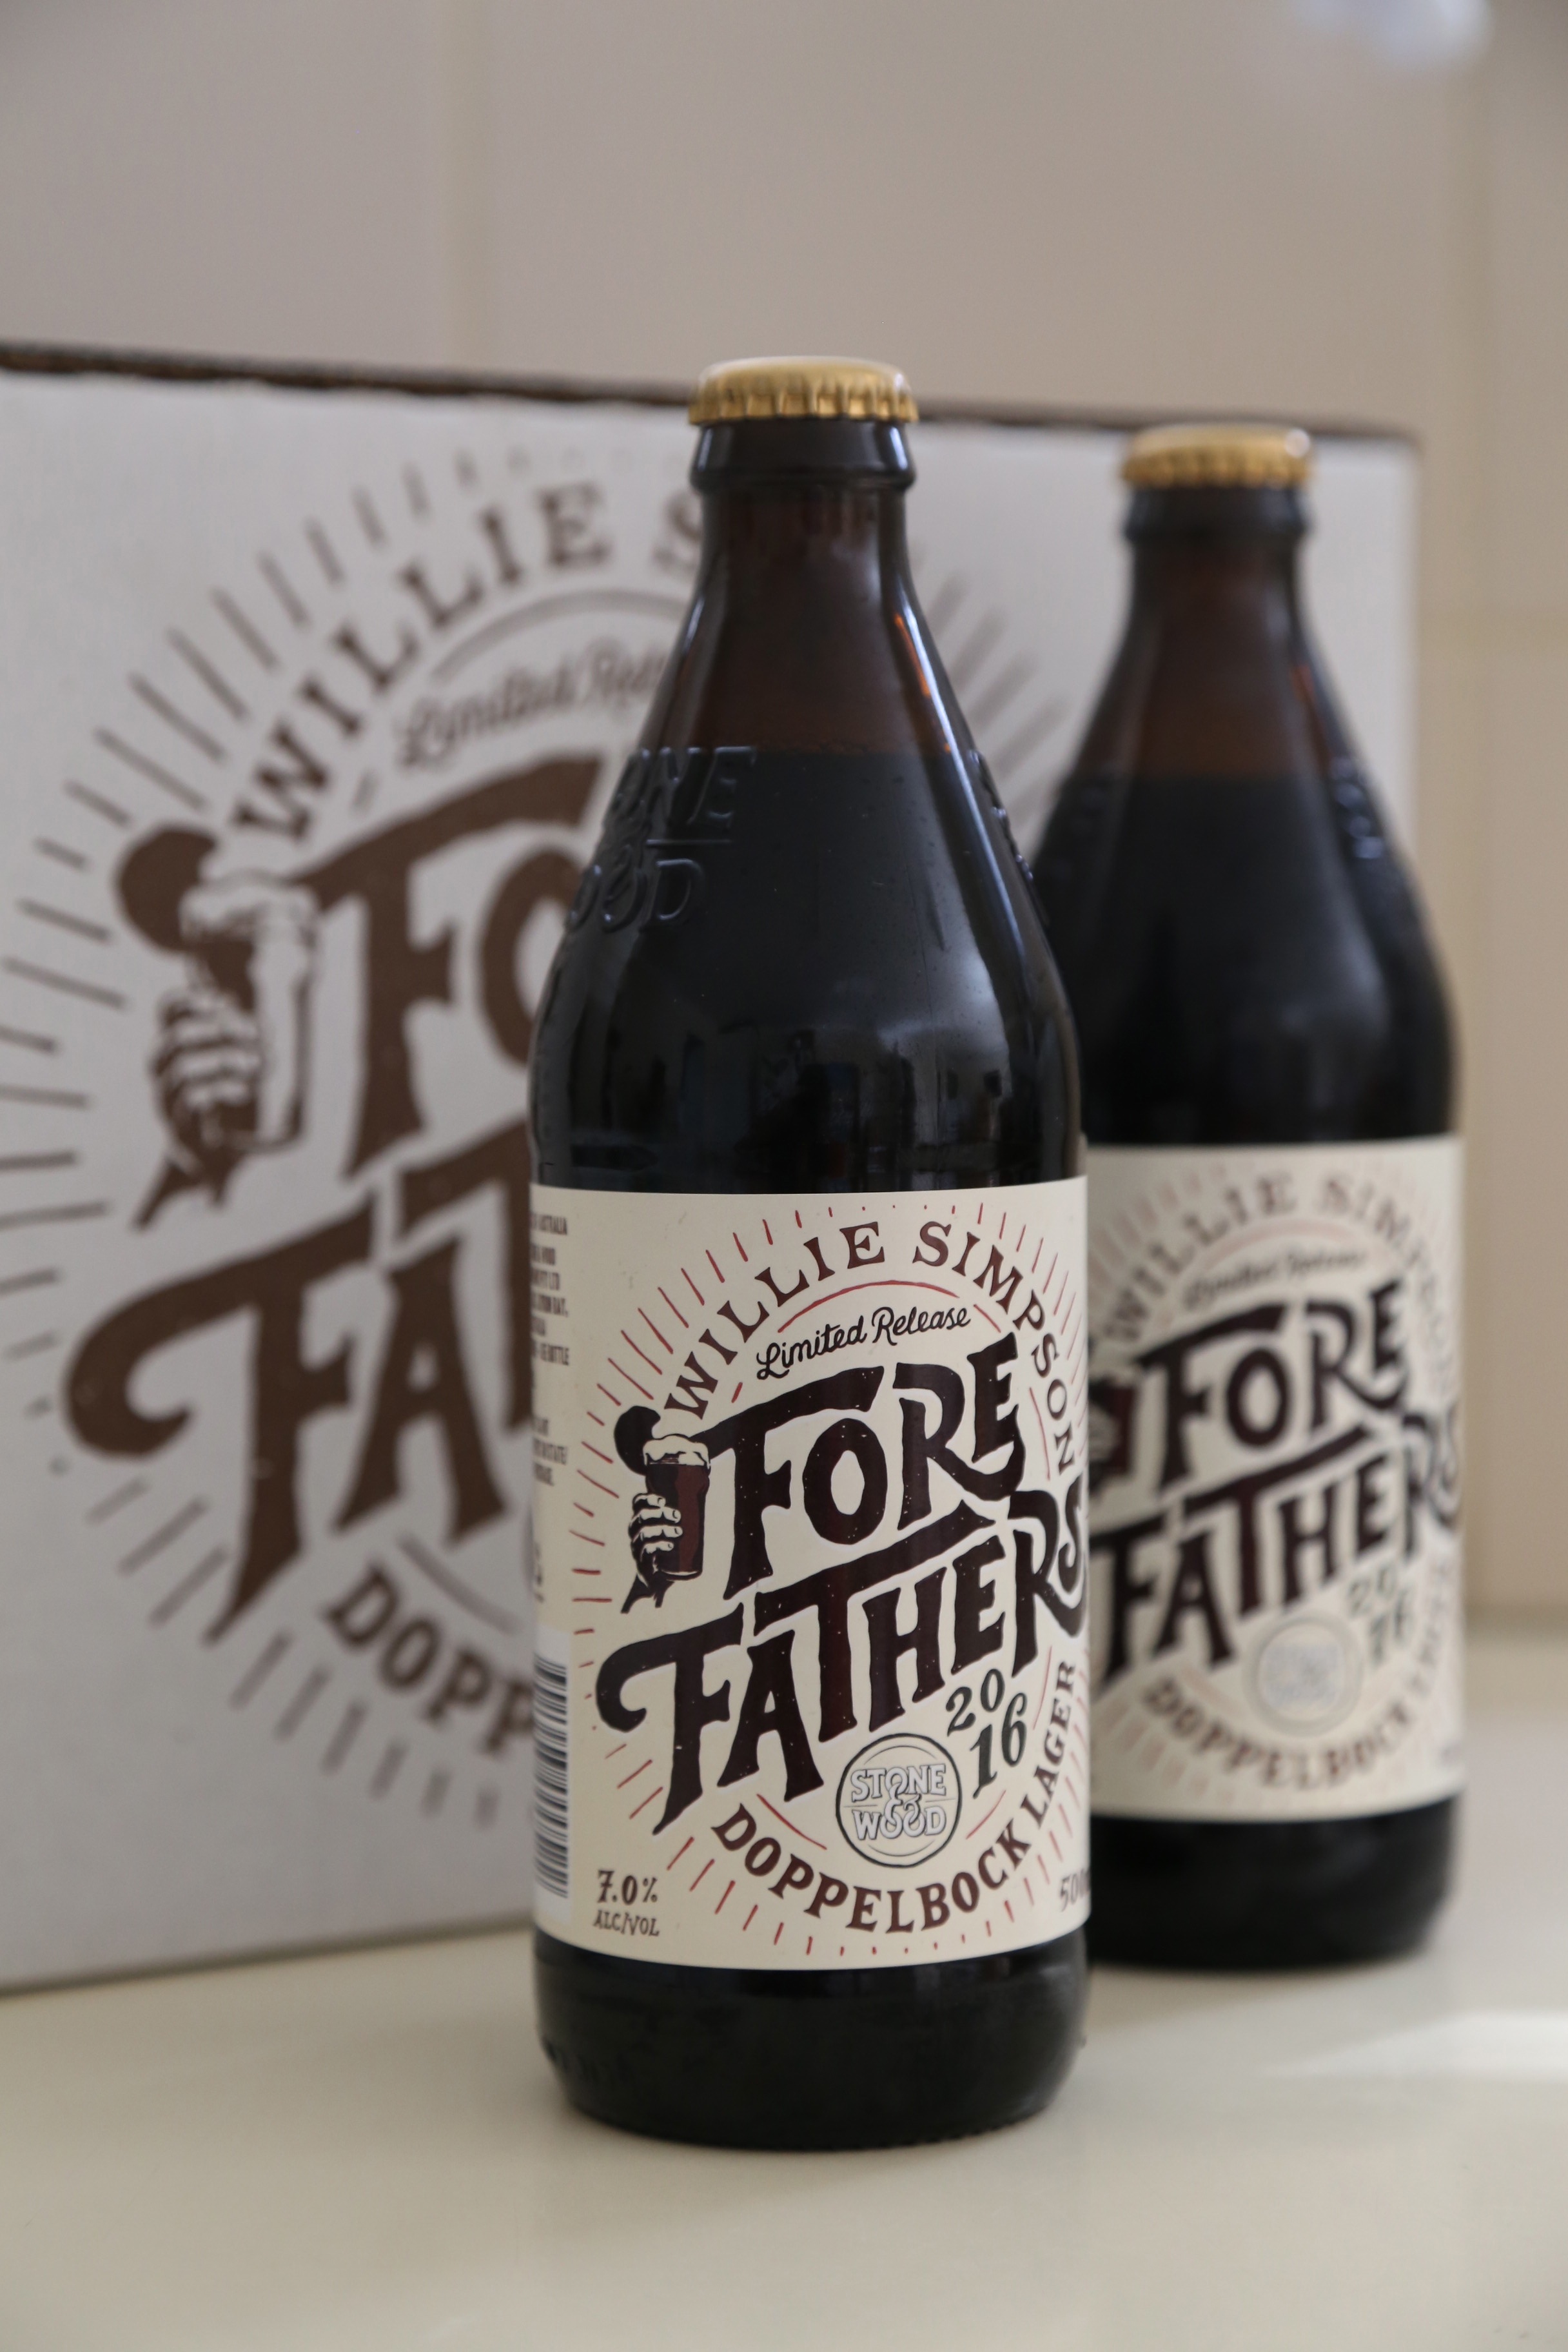 Forefathers 2016 now available